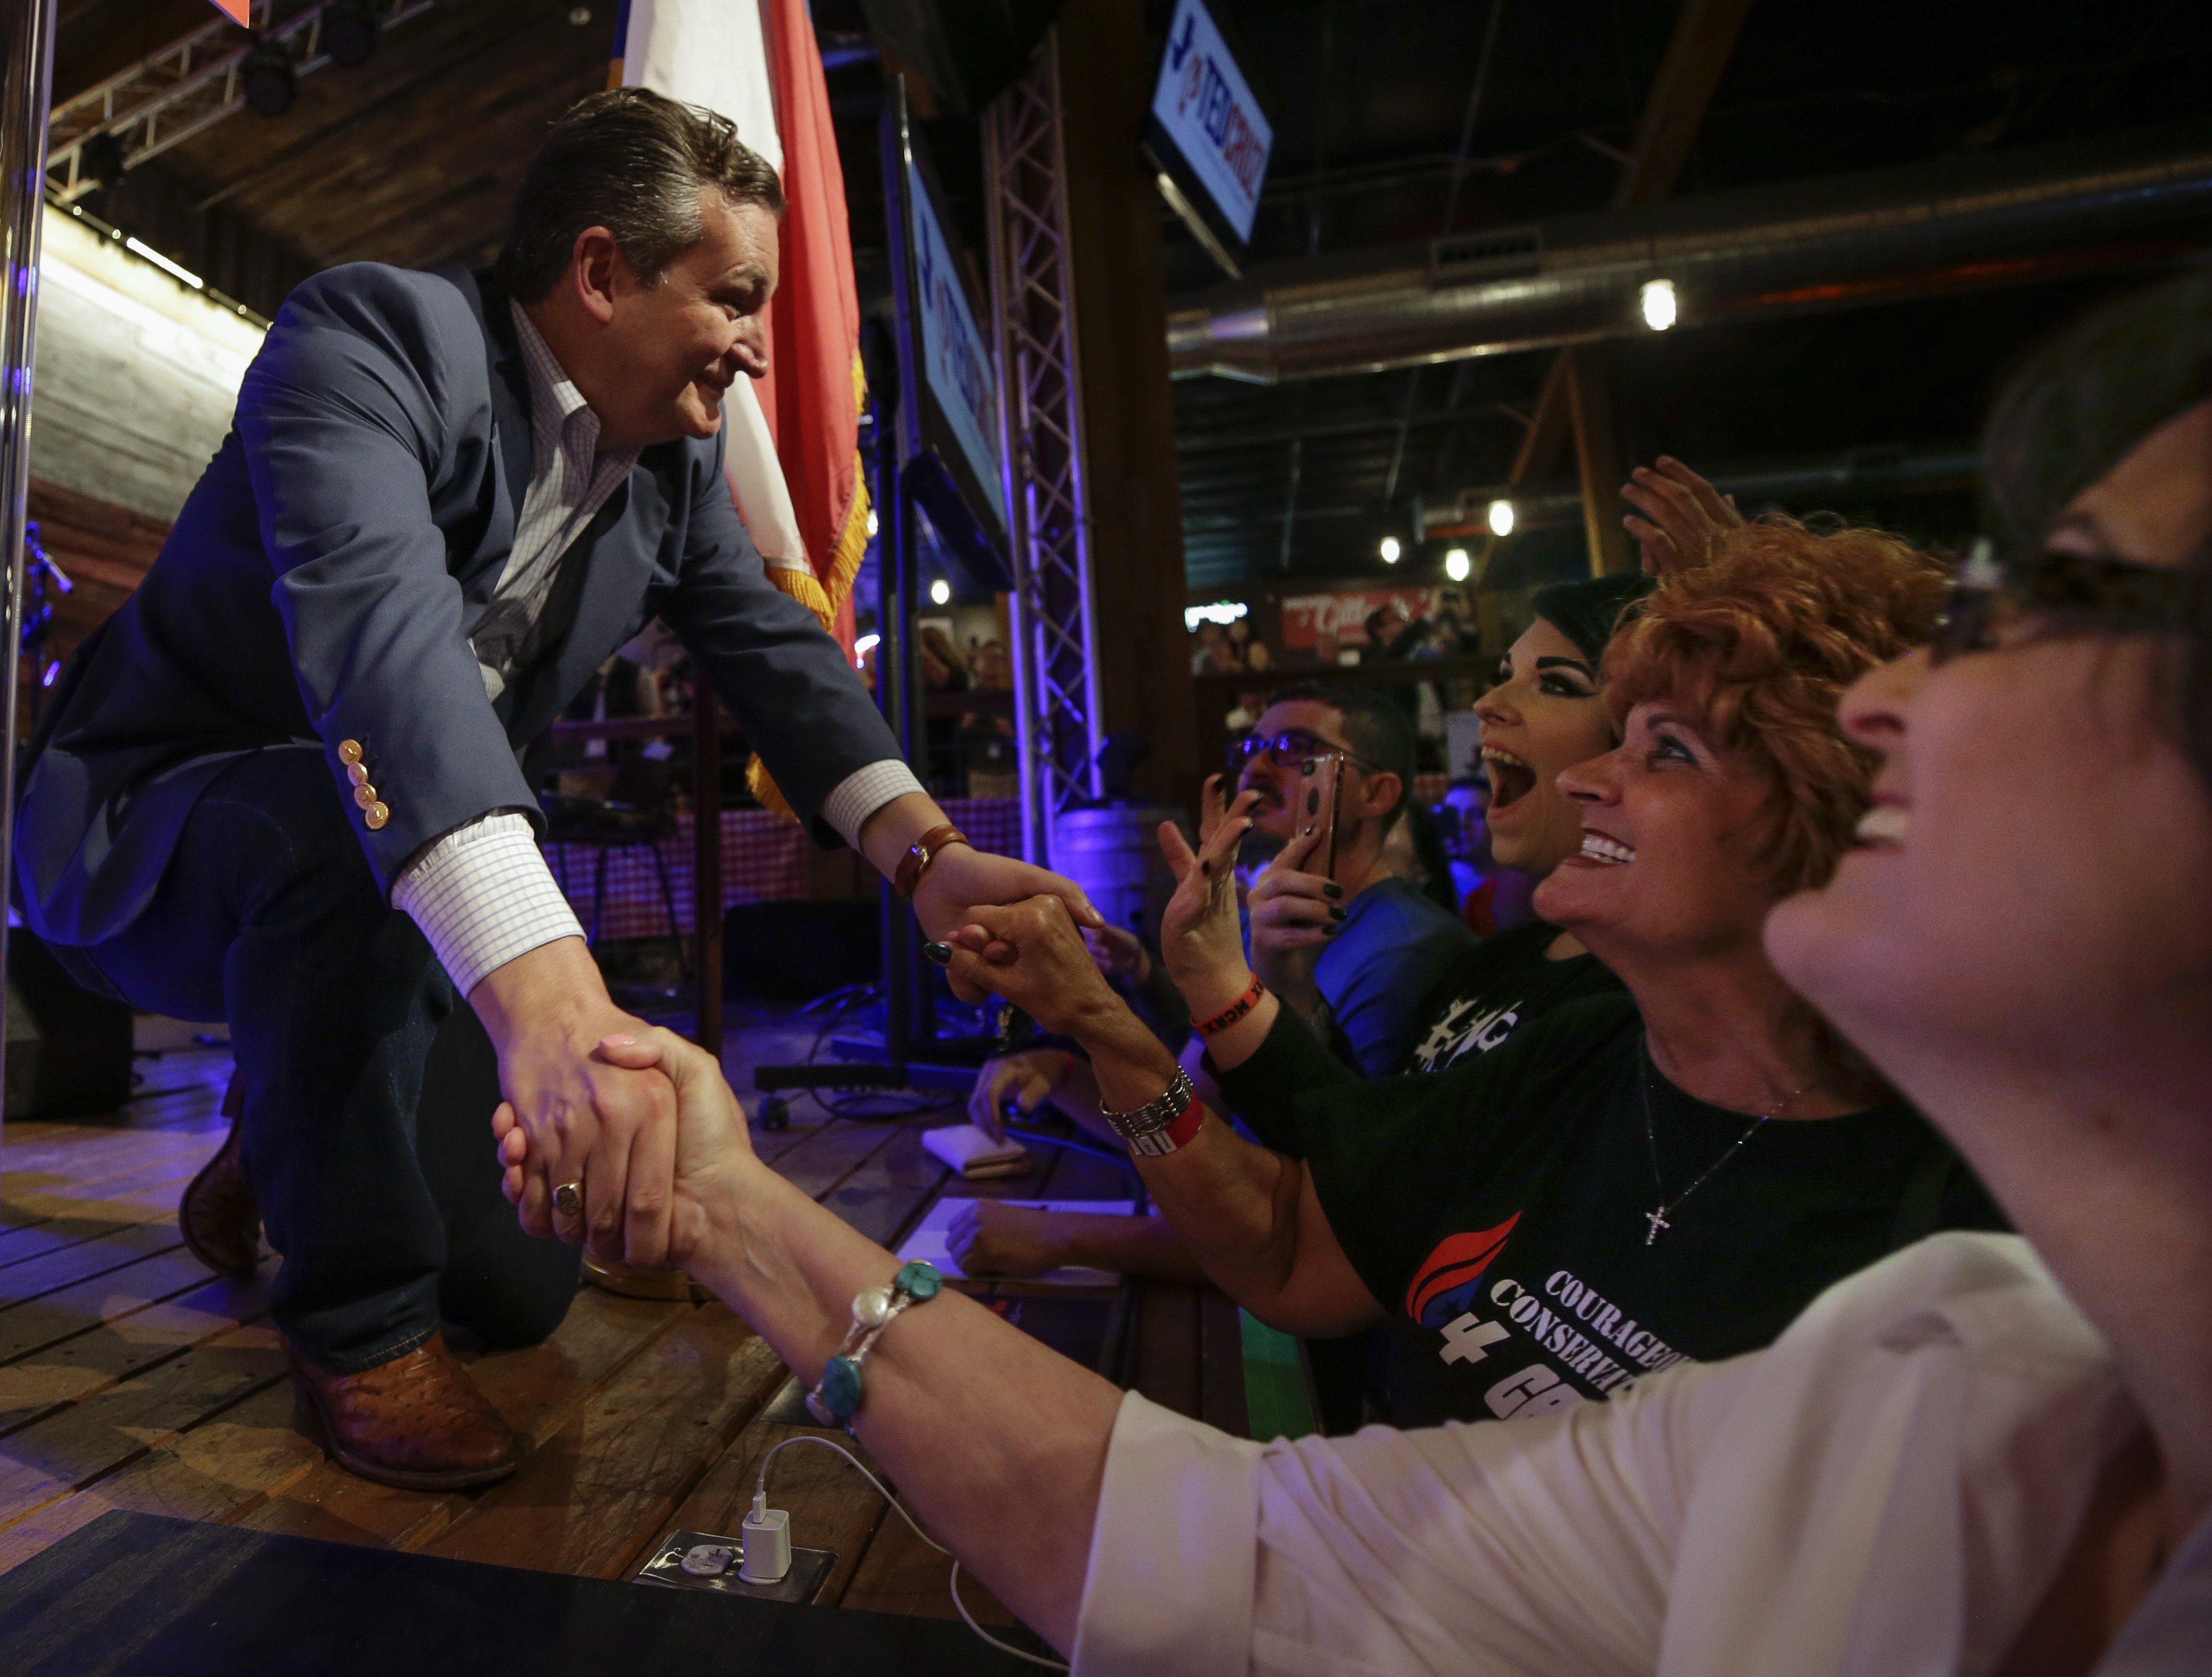 Sen. Ted Cruz (R-TX) shakes hands with supporters during a rally to launch his re-election campaign at the Redneck Country Club on April 2, 2018 in Stafford, Texas. Cruz is defending his bid for a second term as Texas' junior senator against Democratic U.S. Rep. Beto O'Rourke. (Erich Schlegel/Getty Images)